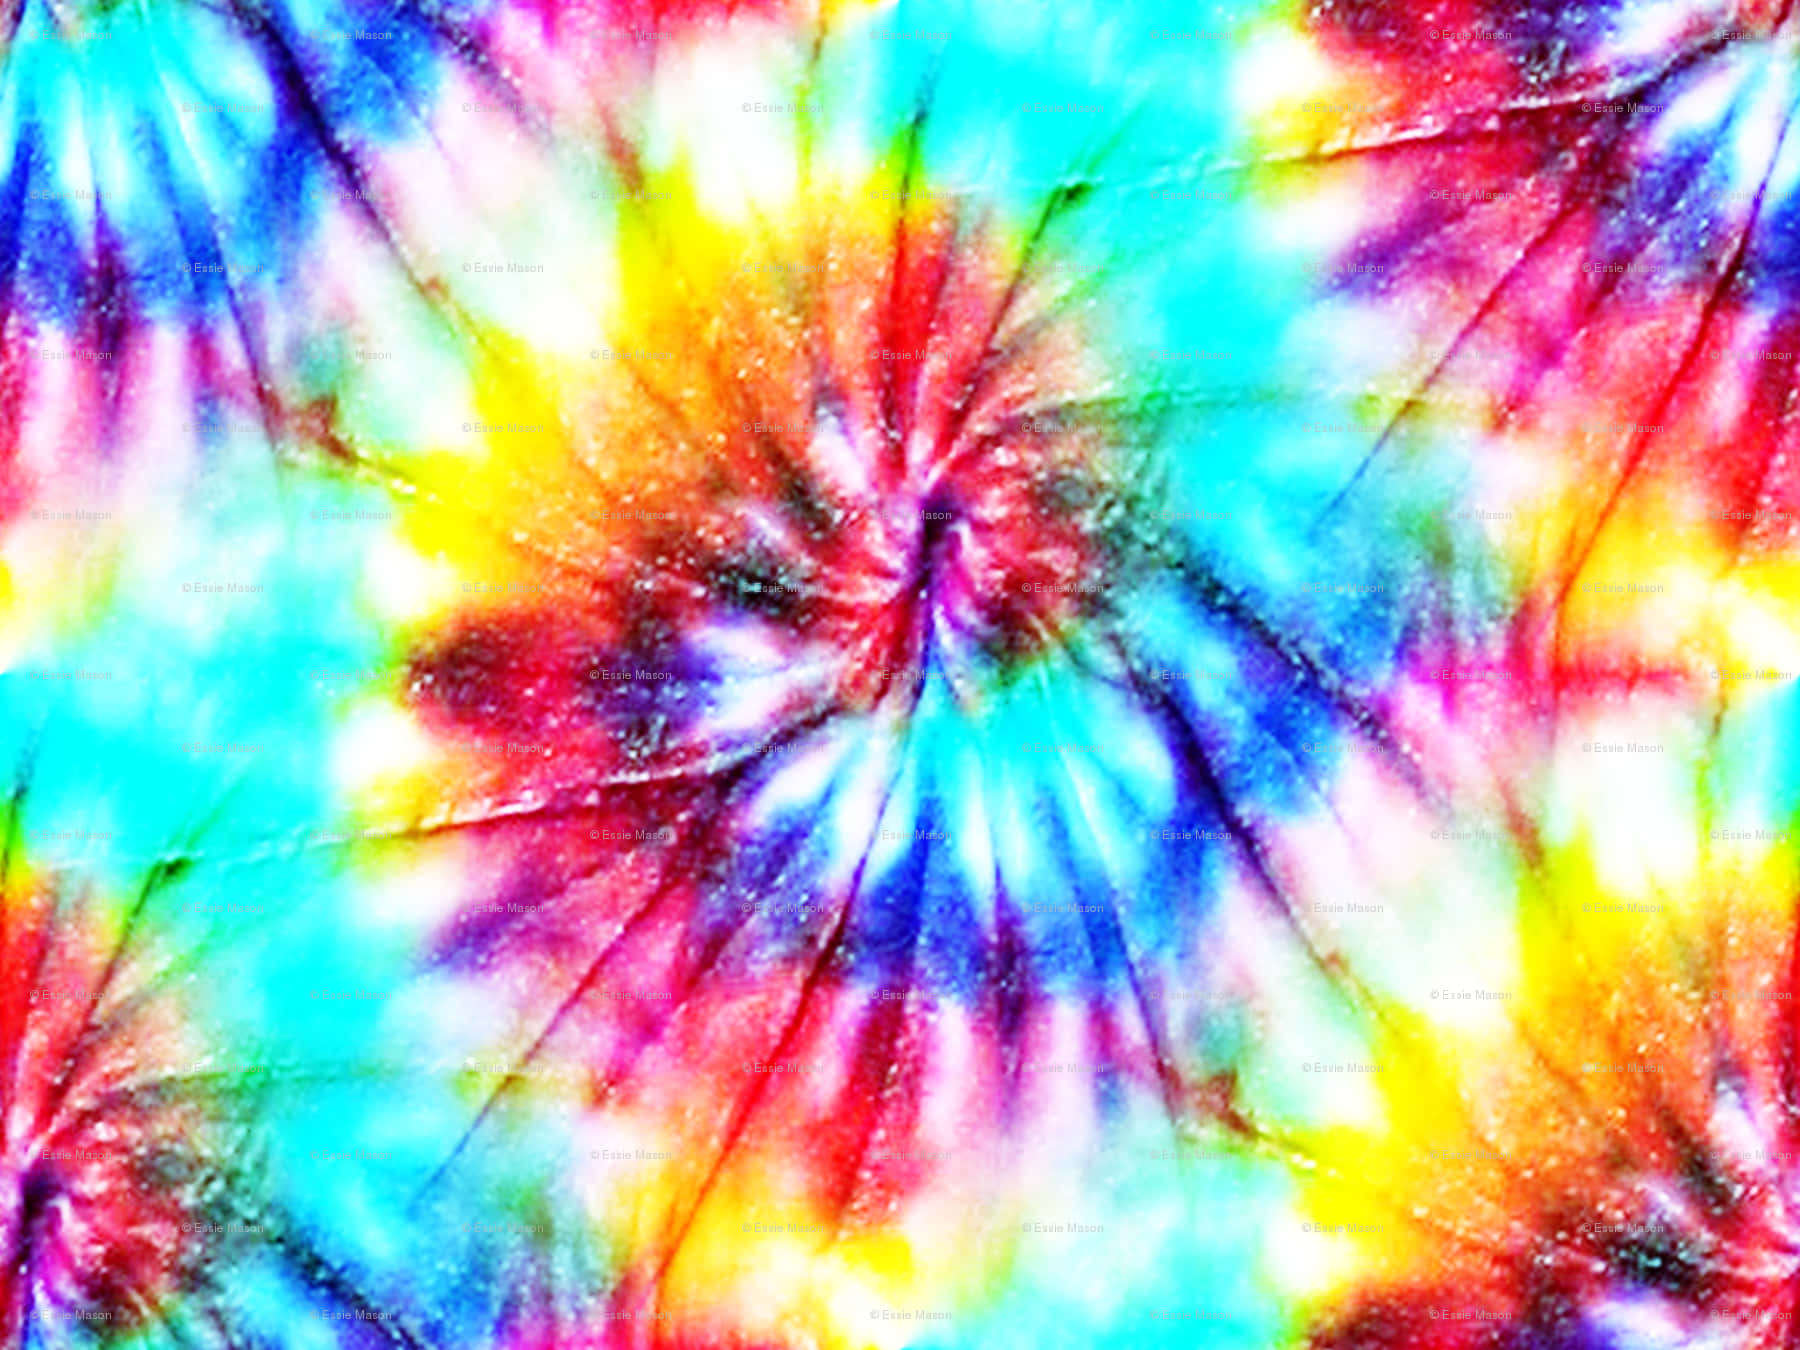 Get creative with Tie Dye!